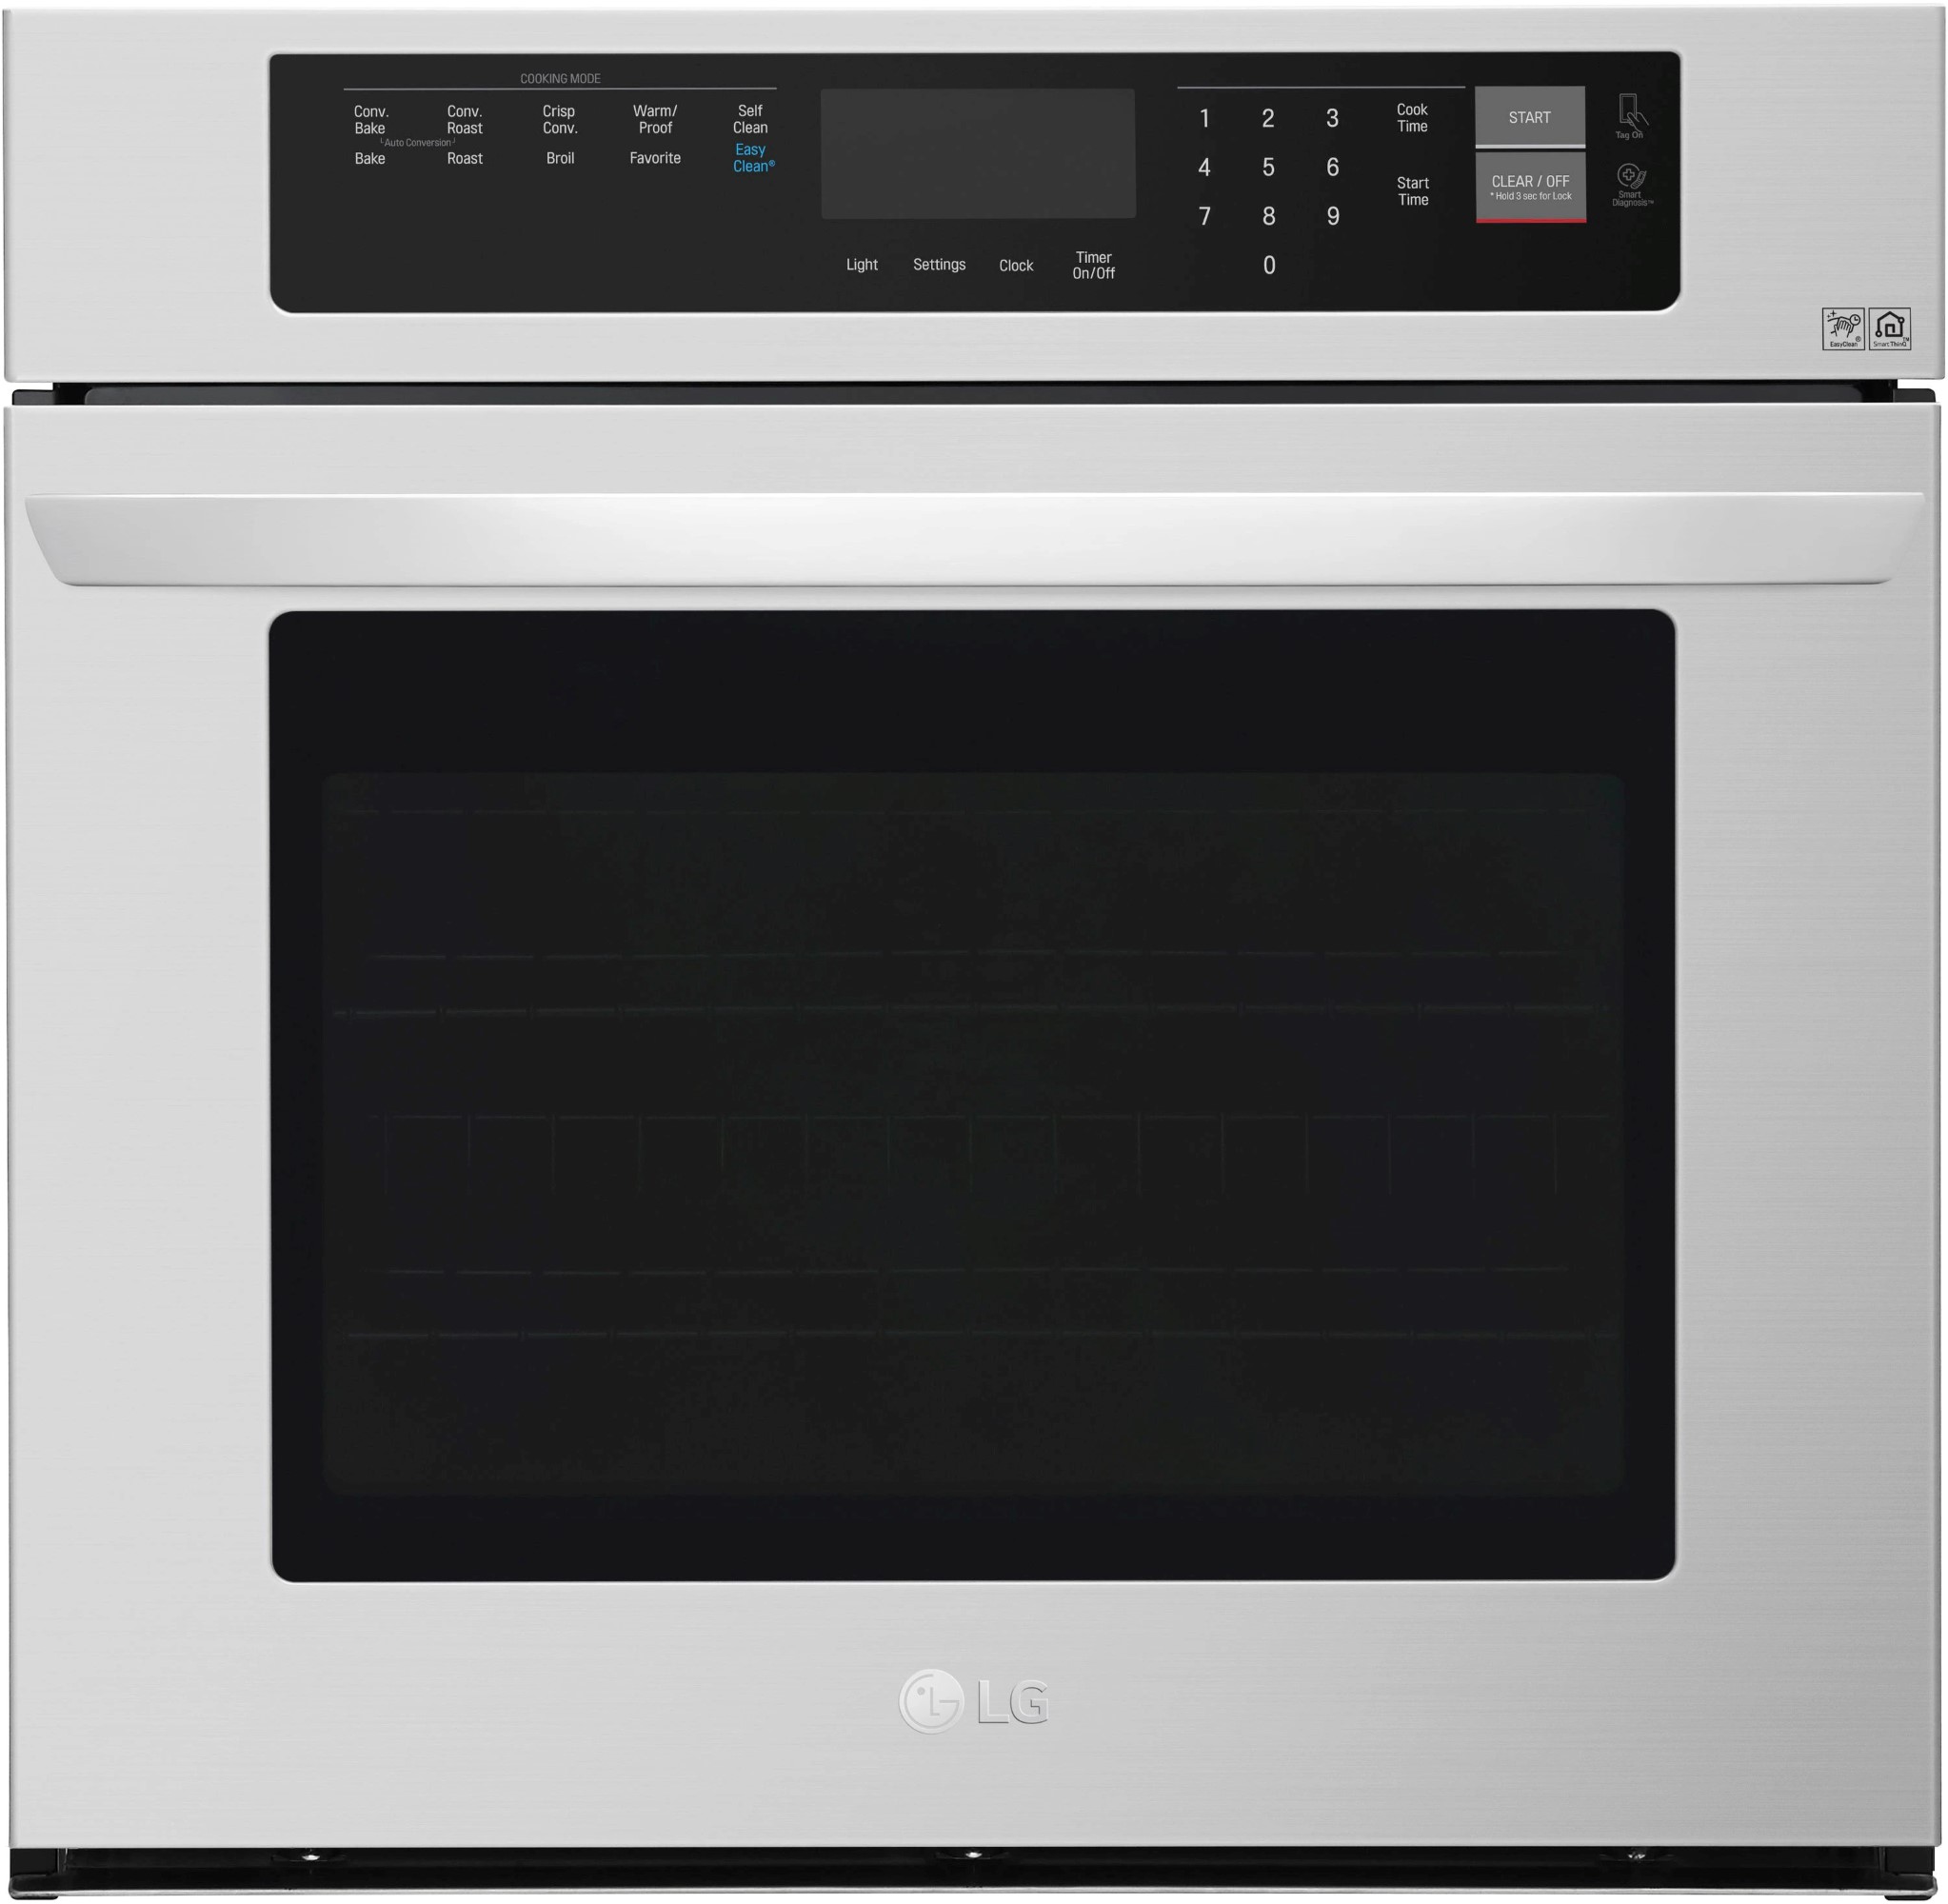 How To Fix The Error Code F1 For LG Oven